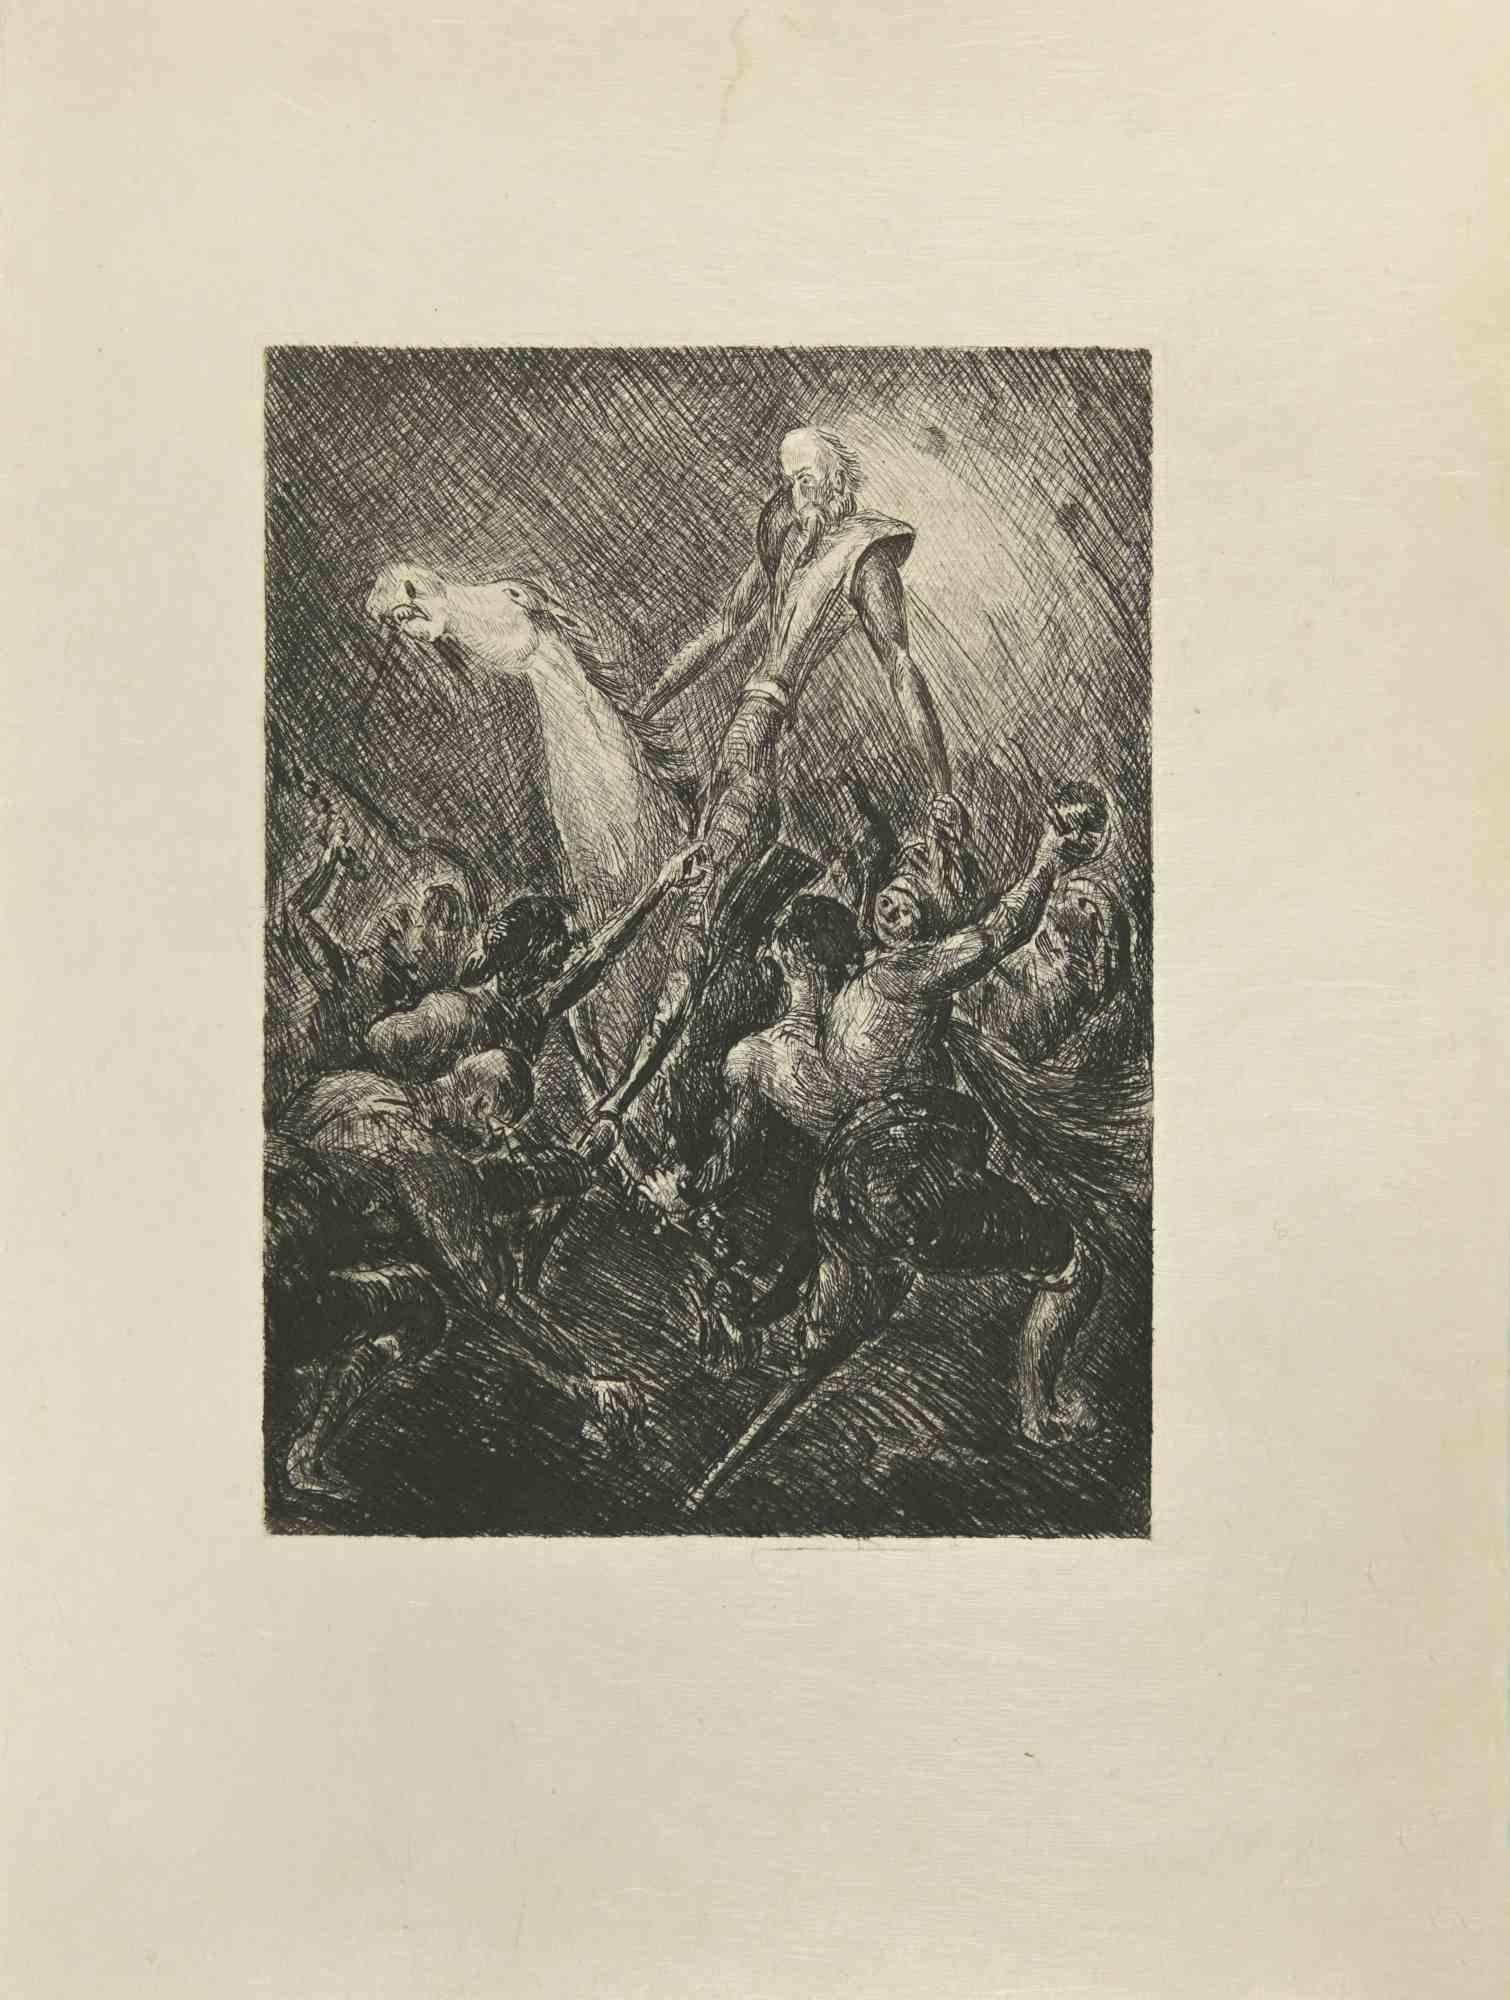 Don Quixote Galloping is an etching and drypoint print on ivory-colored Japanese paper, realized by Wladyslaw Jahl in 1951.

It belongs to a limited edition of 125 specimens.

Good conditions.

The artwork represents a visual scene from Don Quixote